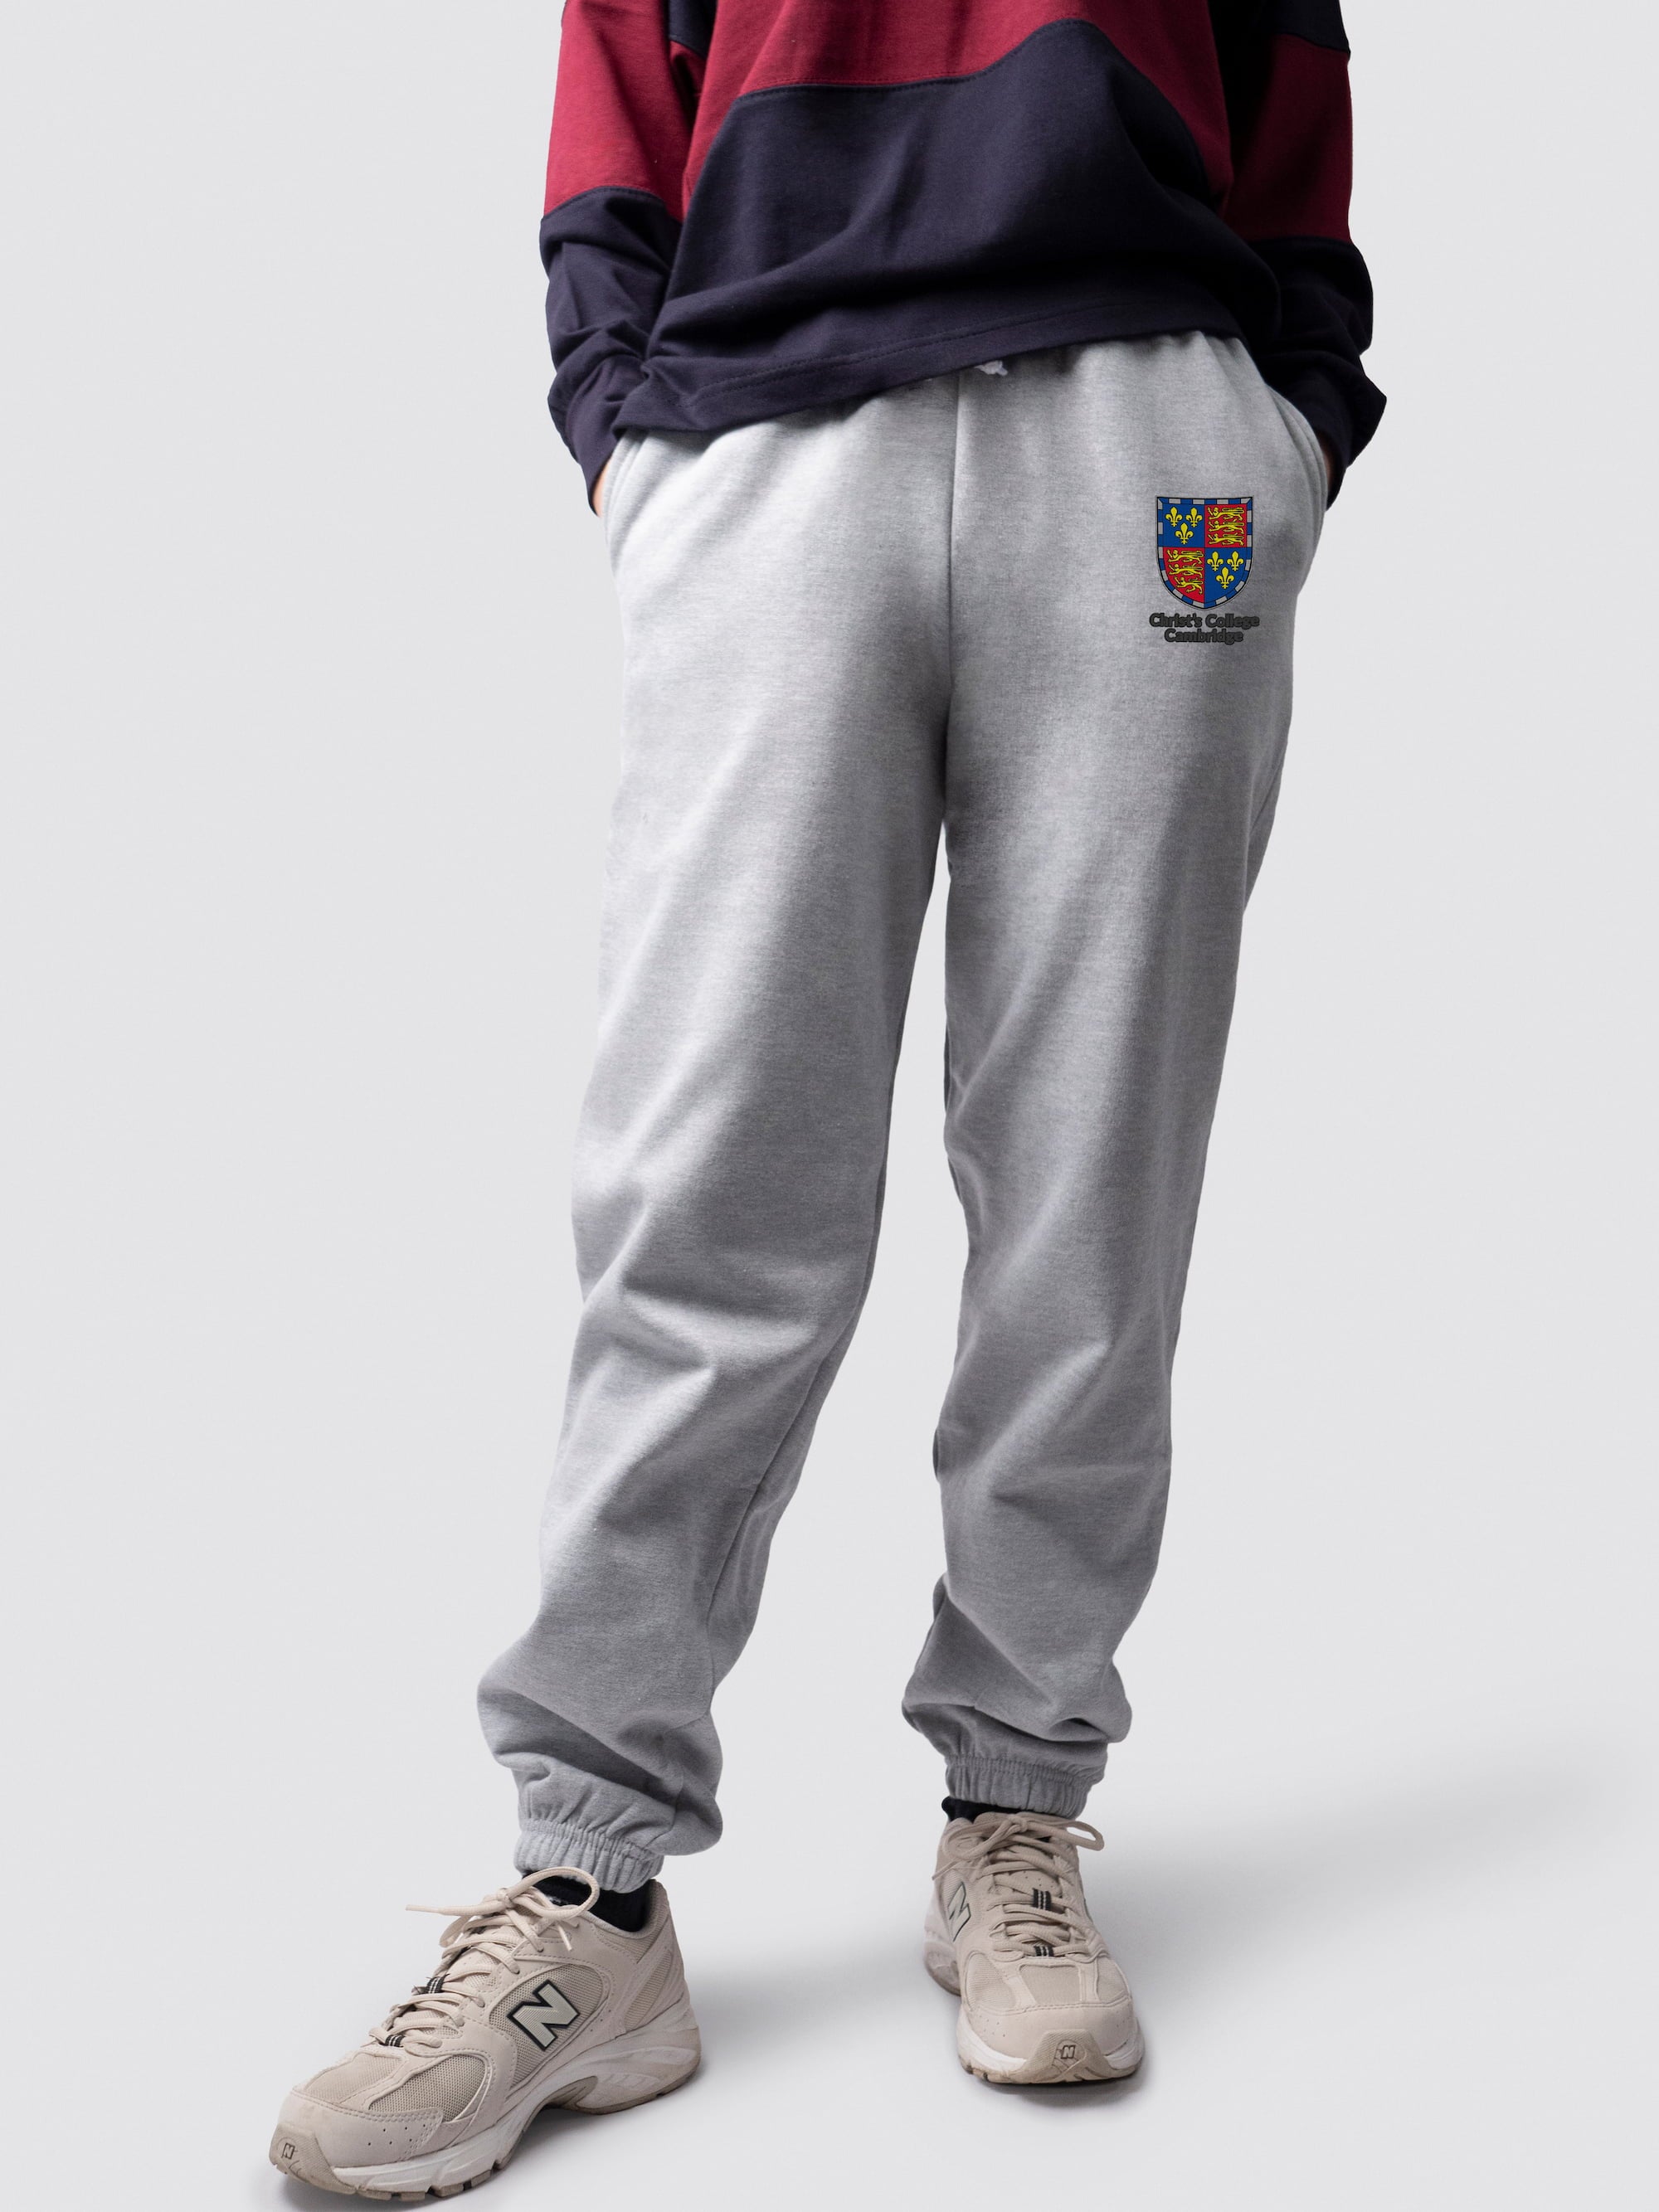 undergraduate cuffed sweatpants, made from soft cotton fabric, with Christ's logo